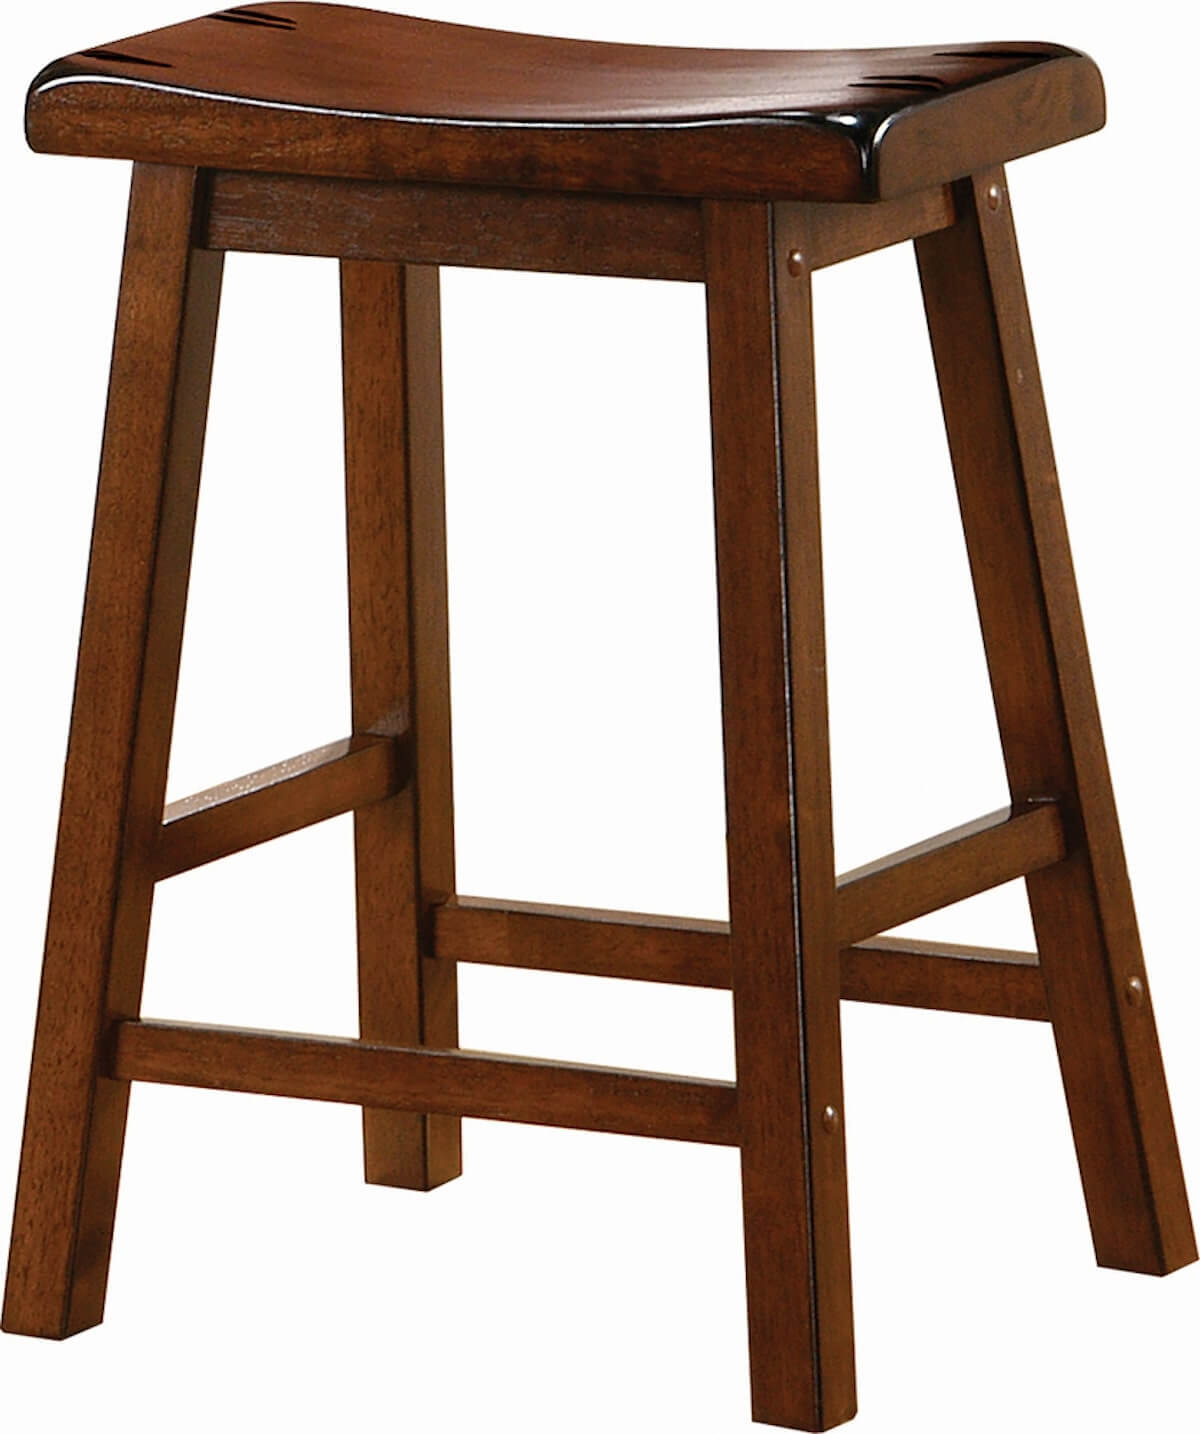 Durant Wooden Counter Height Stools Chestnut